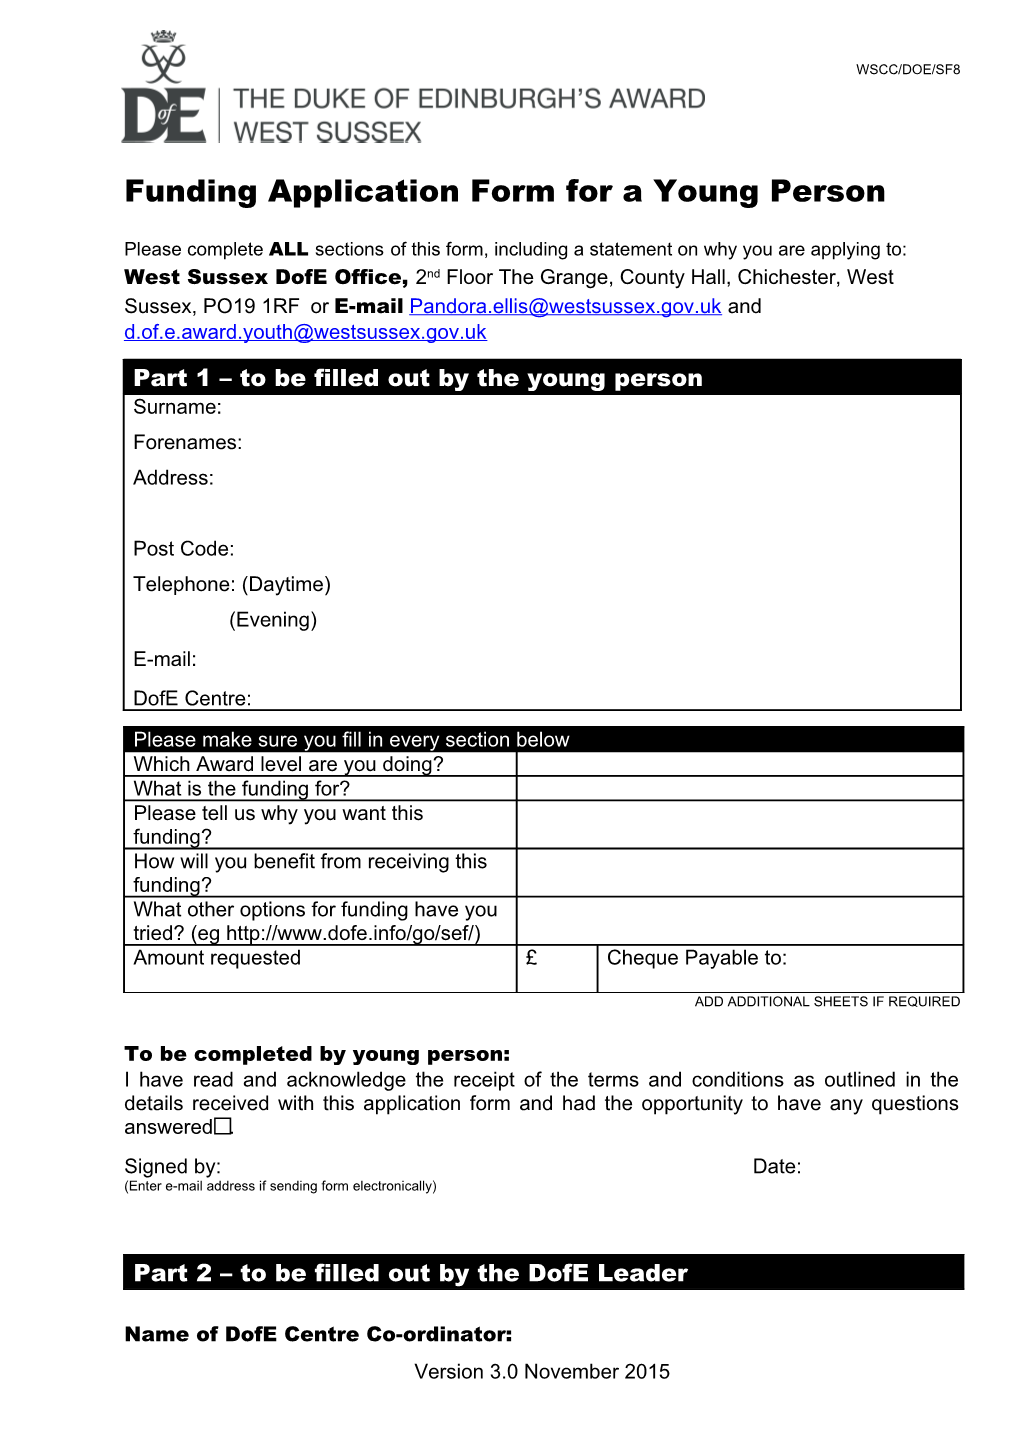 Funding Application Form for a Young Person